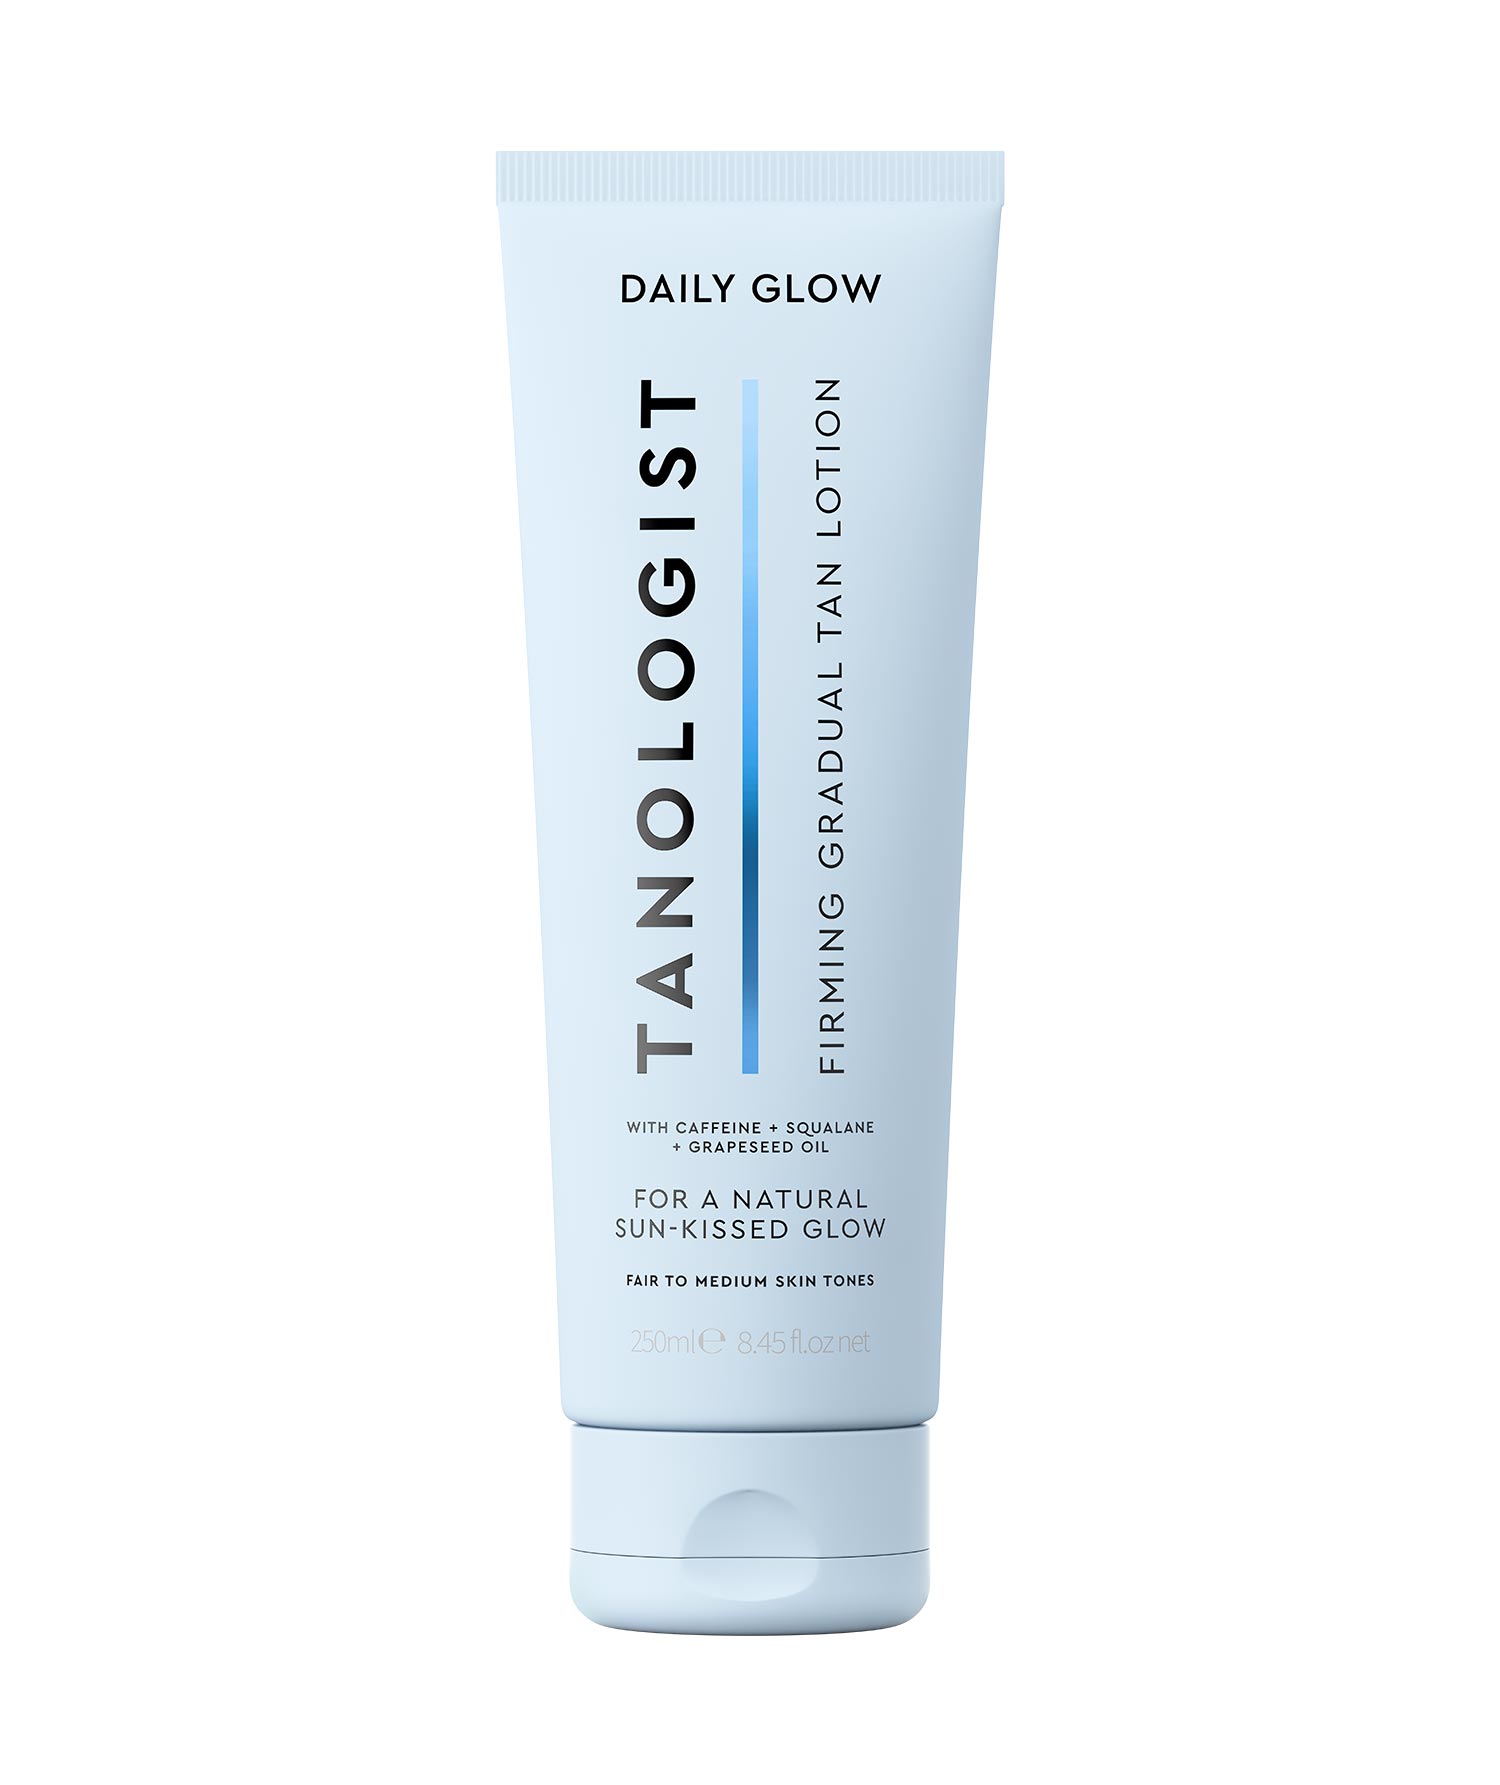 Tanologist_Daily_Glow_Firming_250ml_Fair_Med_Tube_Render